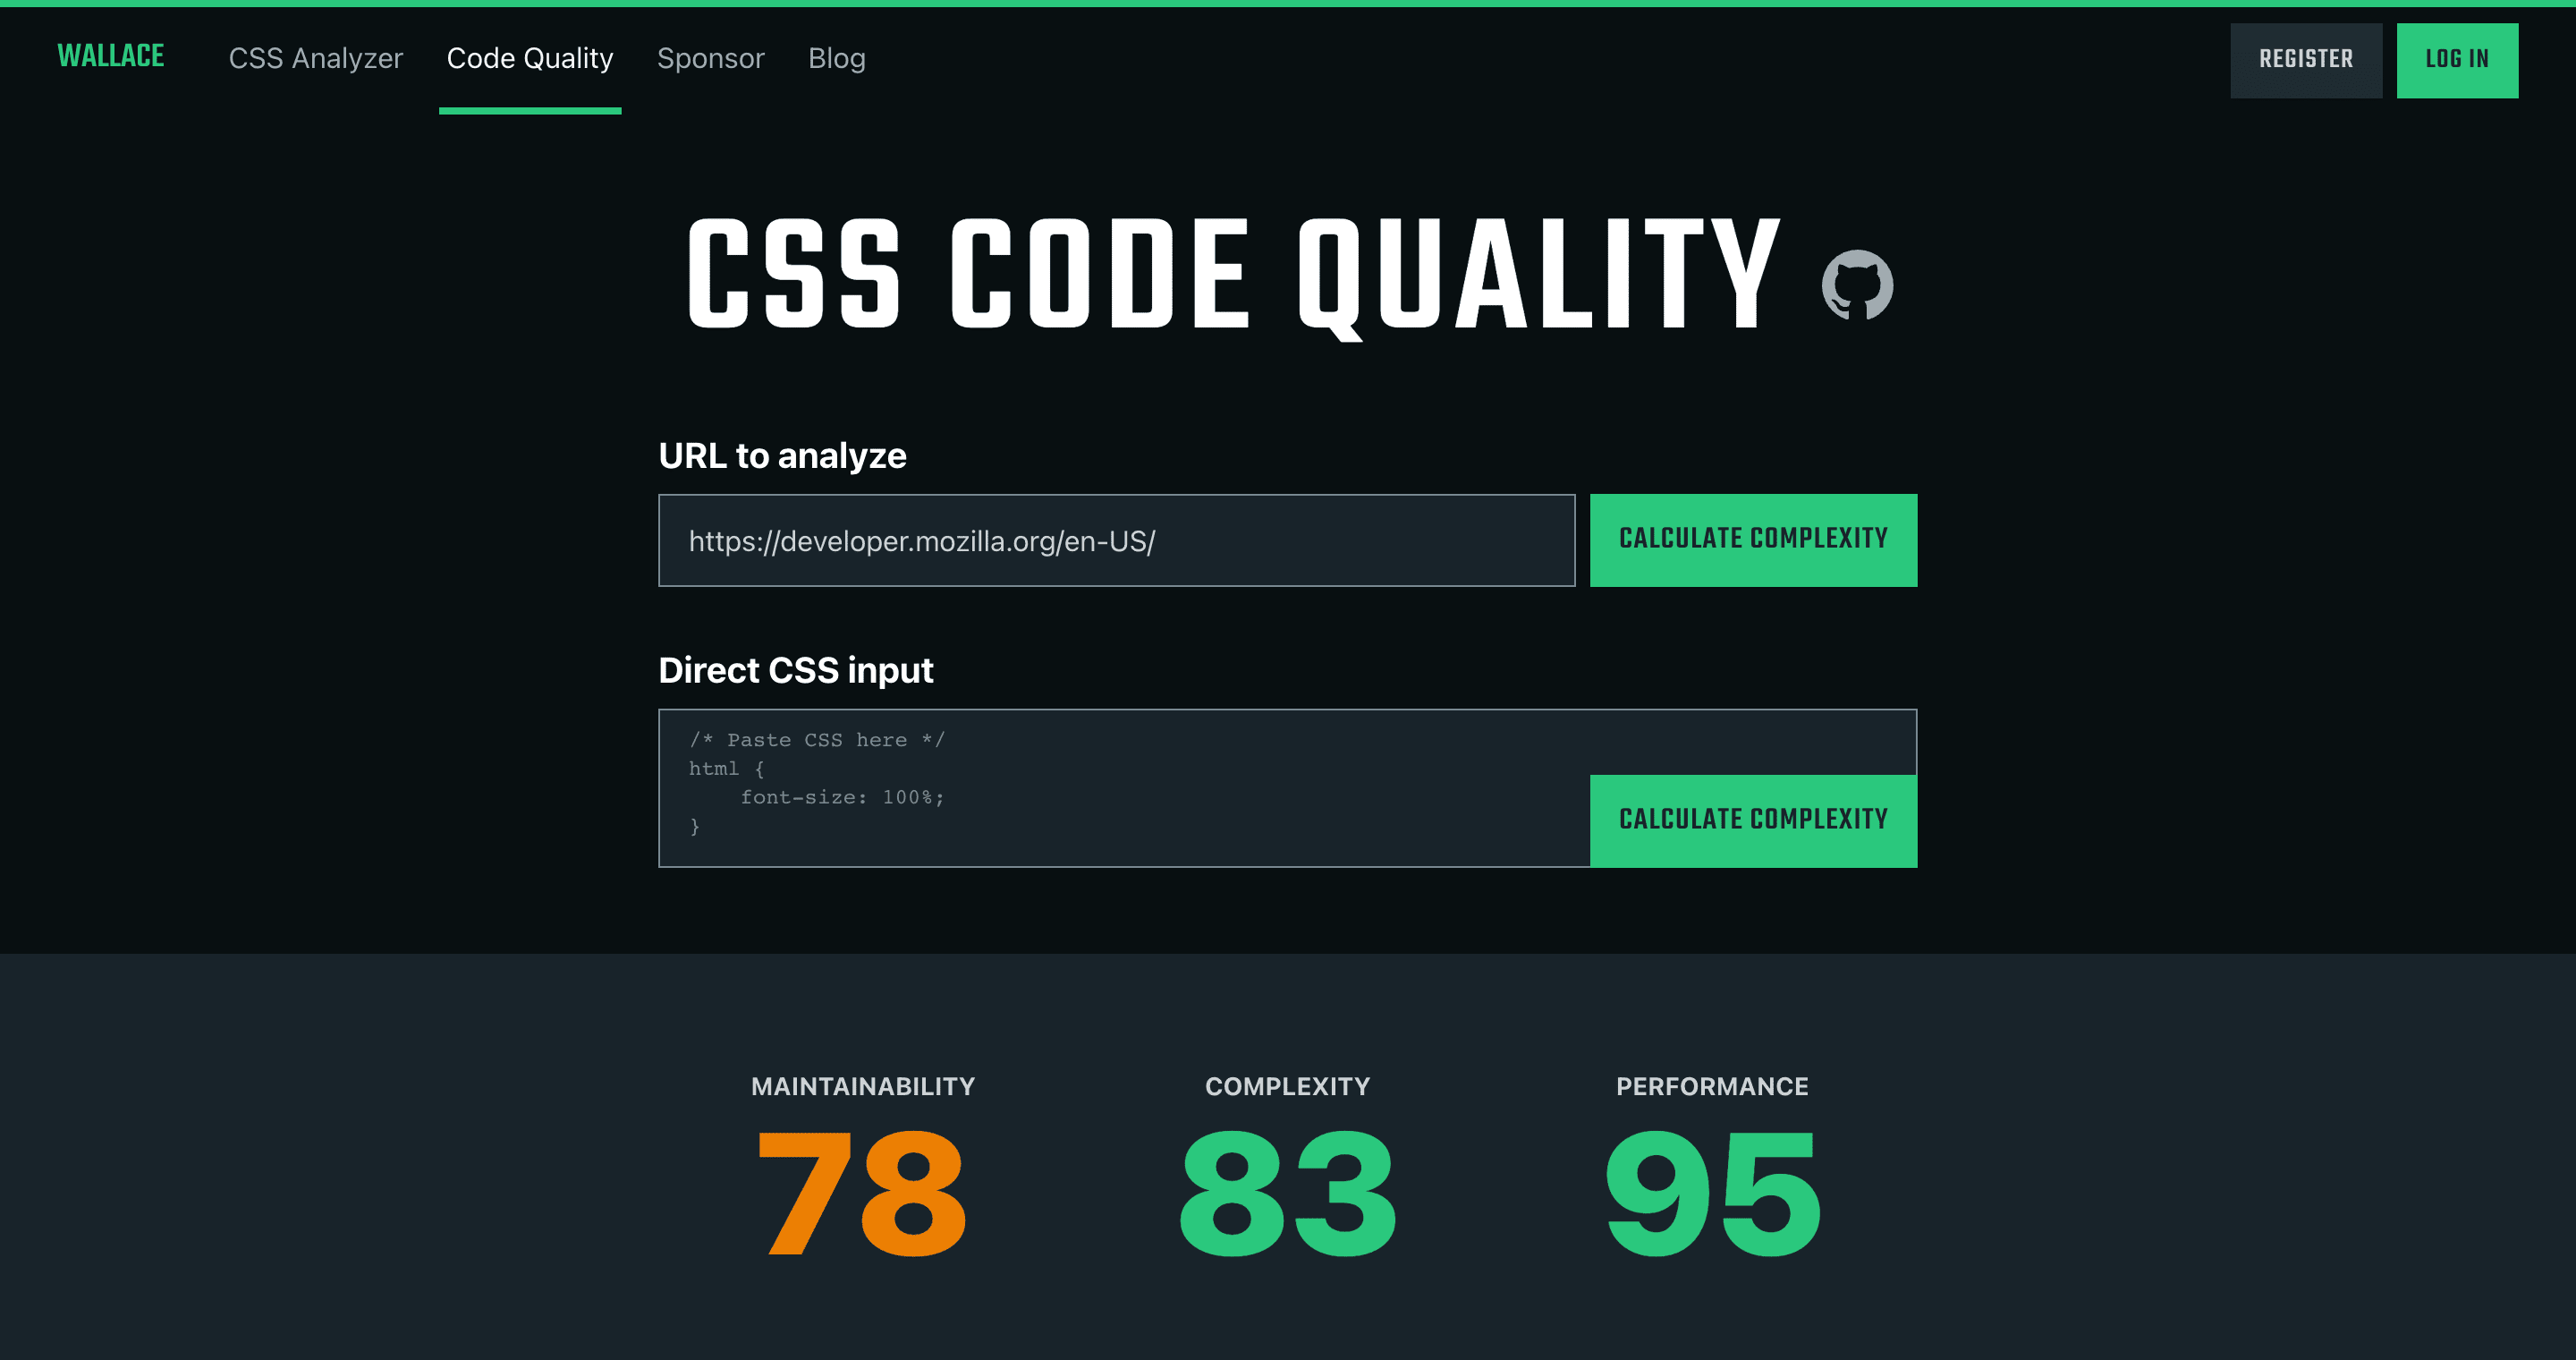 Screenshot of CSS Code Quality scores for MDN site.